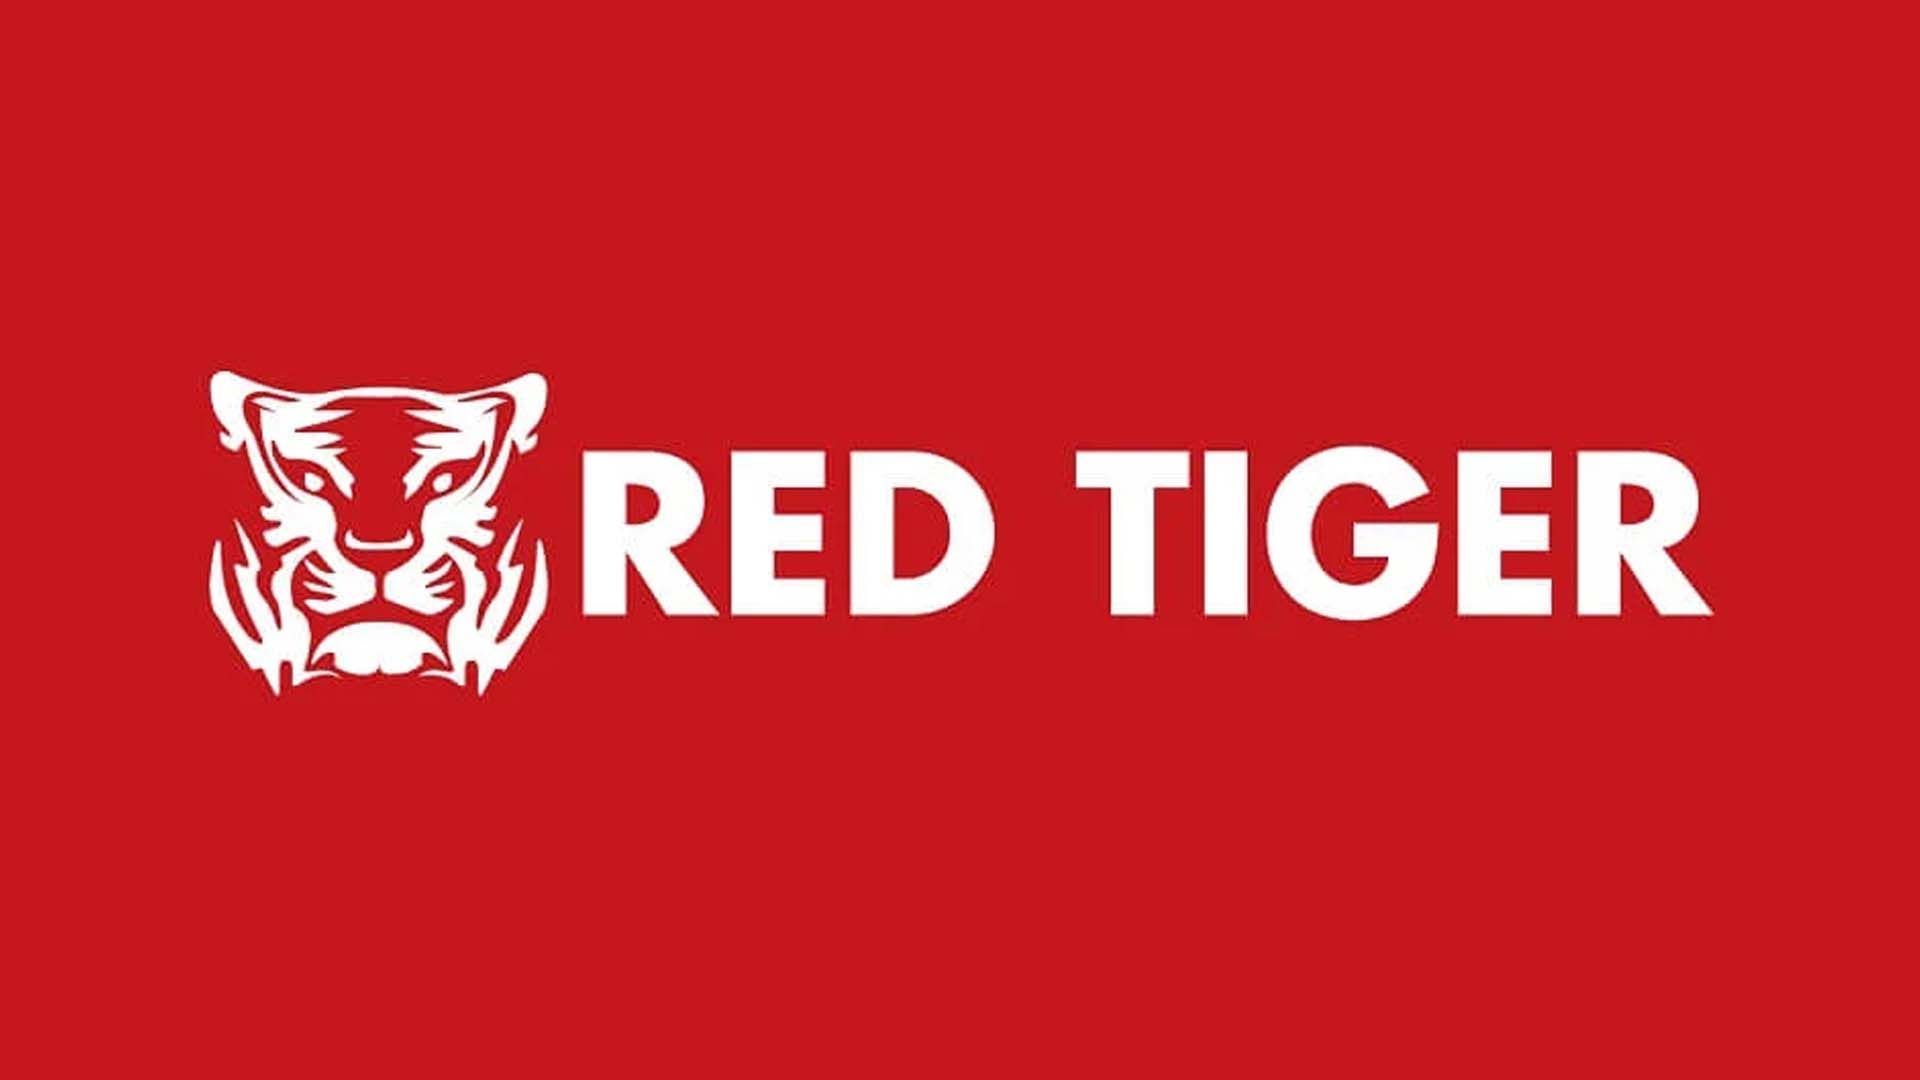 Red Tiger Gaming Provider Free Slot Machine Online Play